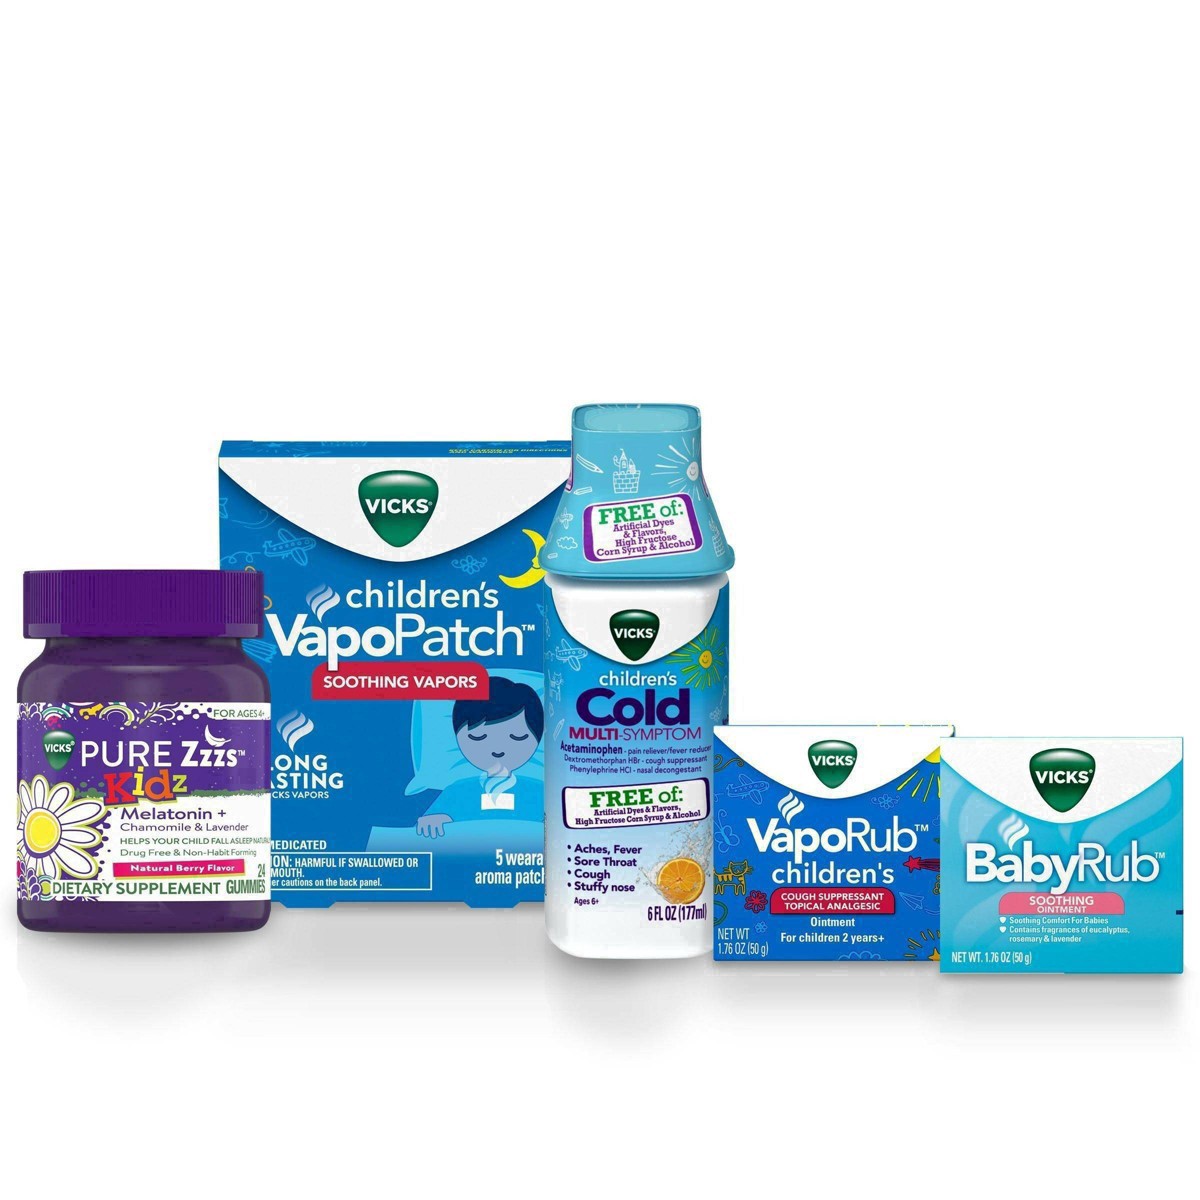 slide 27 of 37, Vicks Children's VapoPatch with Long Lasting Soothing Vapors - Menthol - 5ct, 5 ct